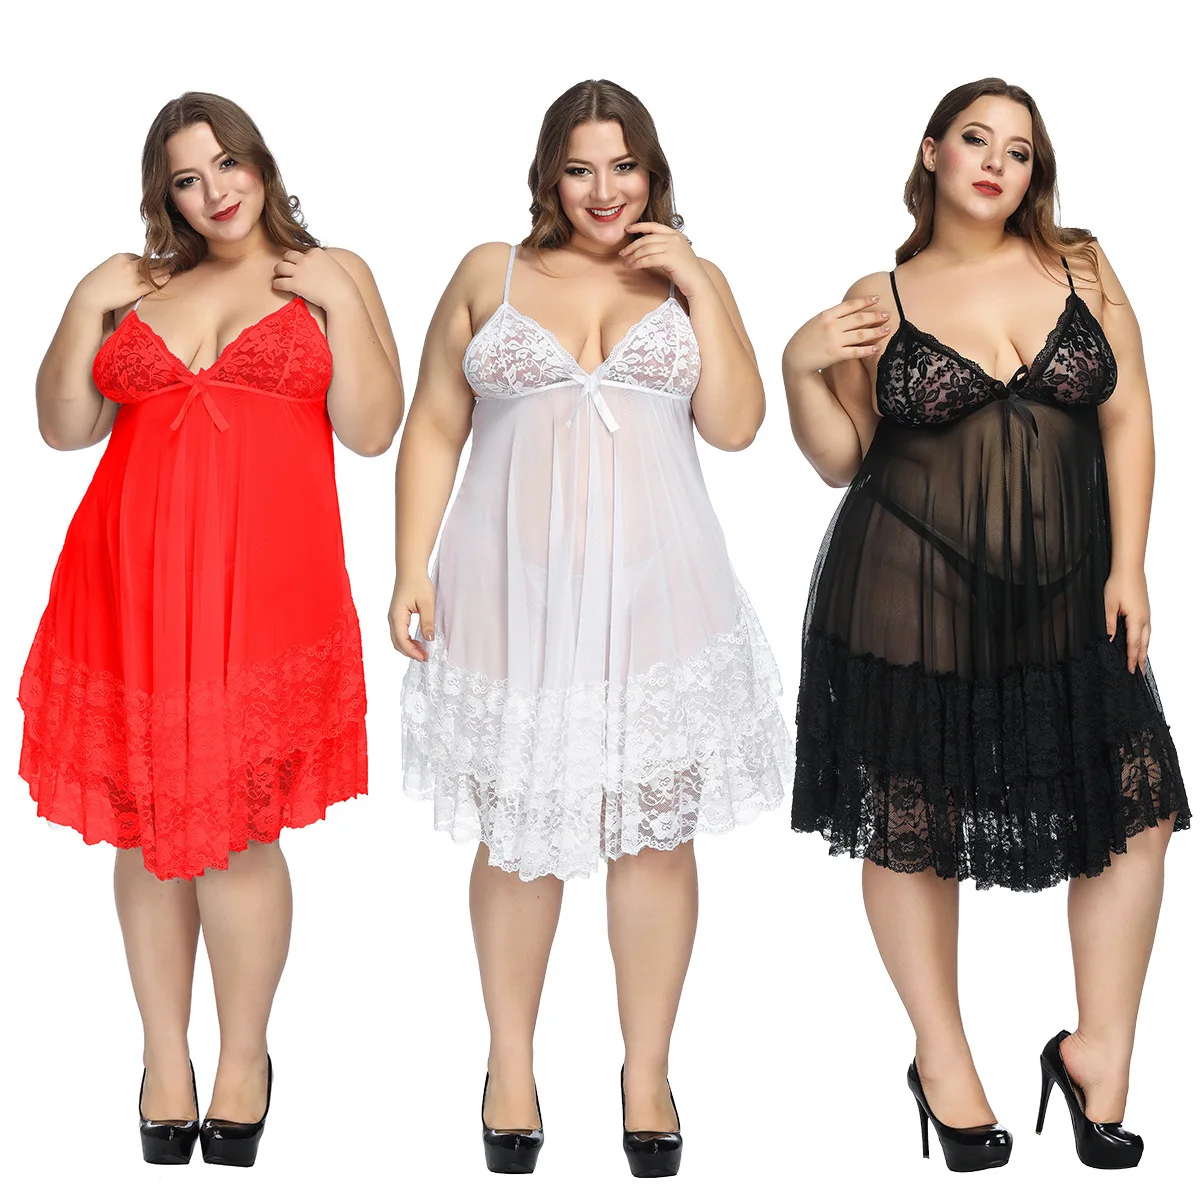 

Hot Selling Sexy Lace Nightgown Dress Nighty Plus Size Pyjamas Women Sleepwear, As your requirement